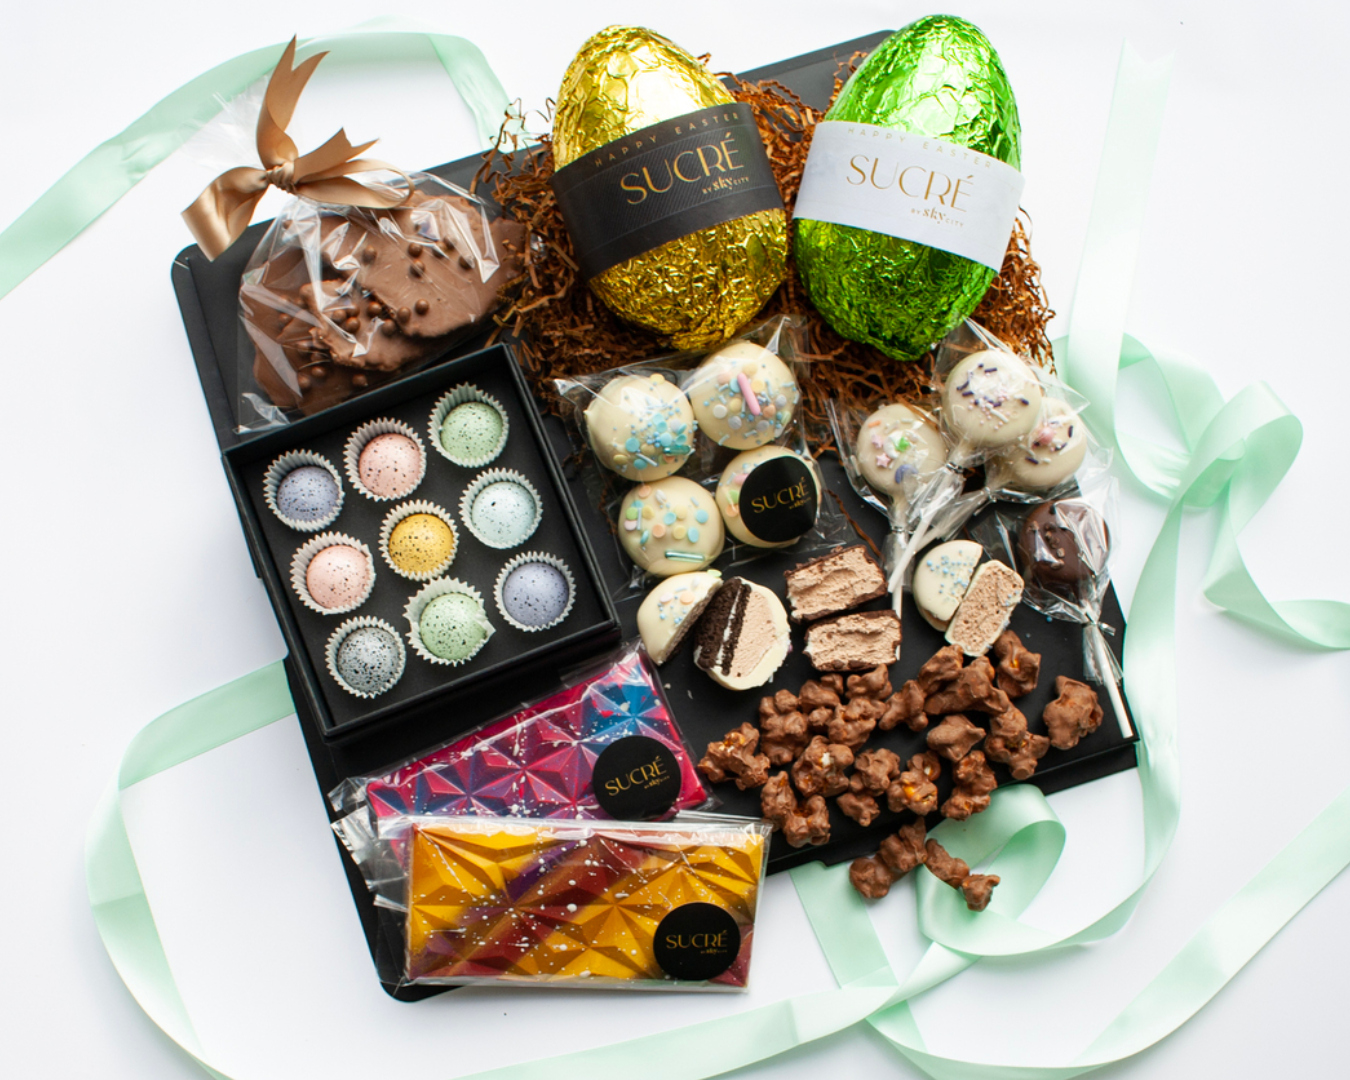 A SUCRÉ' Easter hamper—one of the best Easter treats in Auckland. 